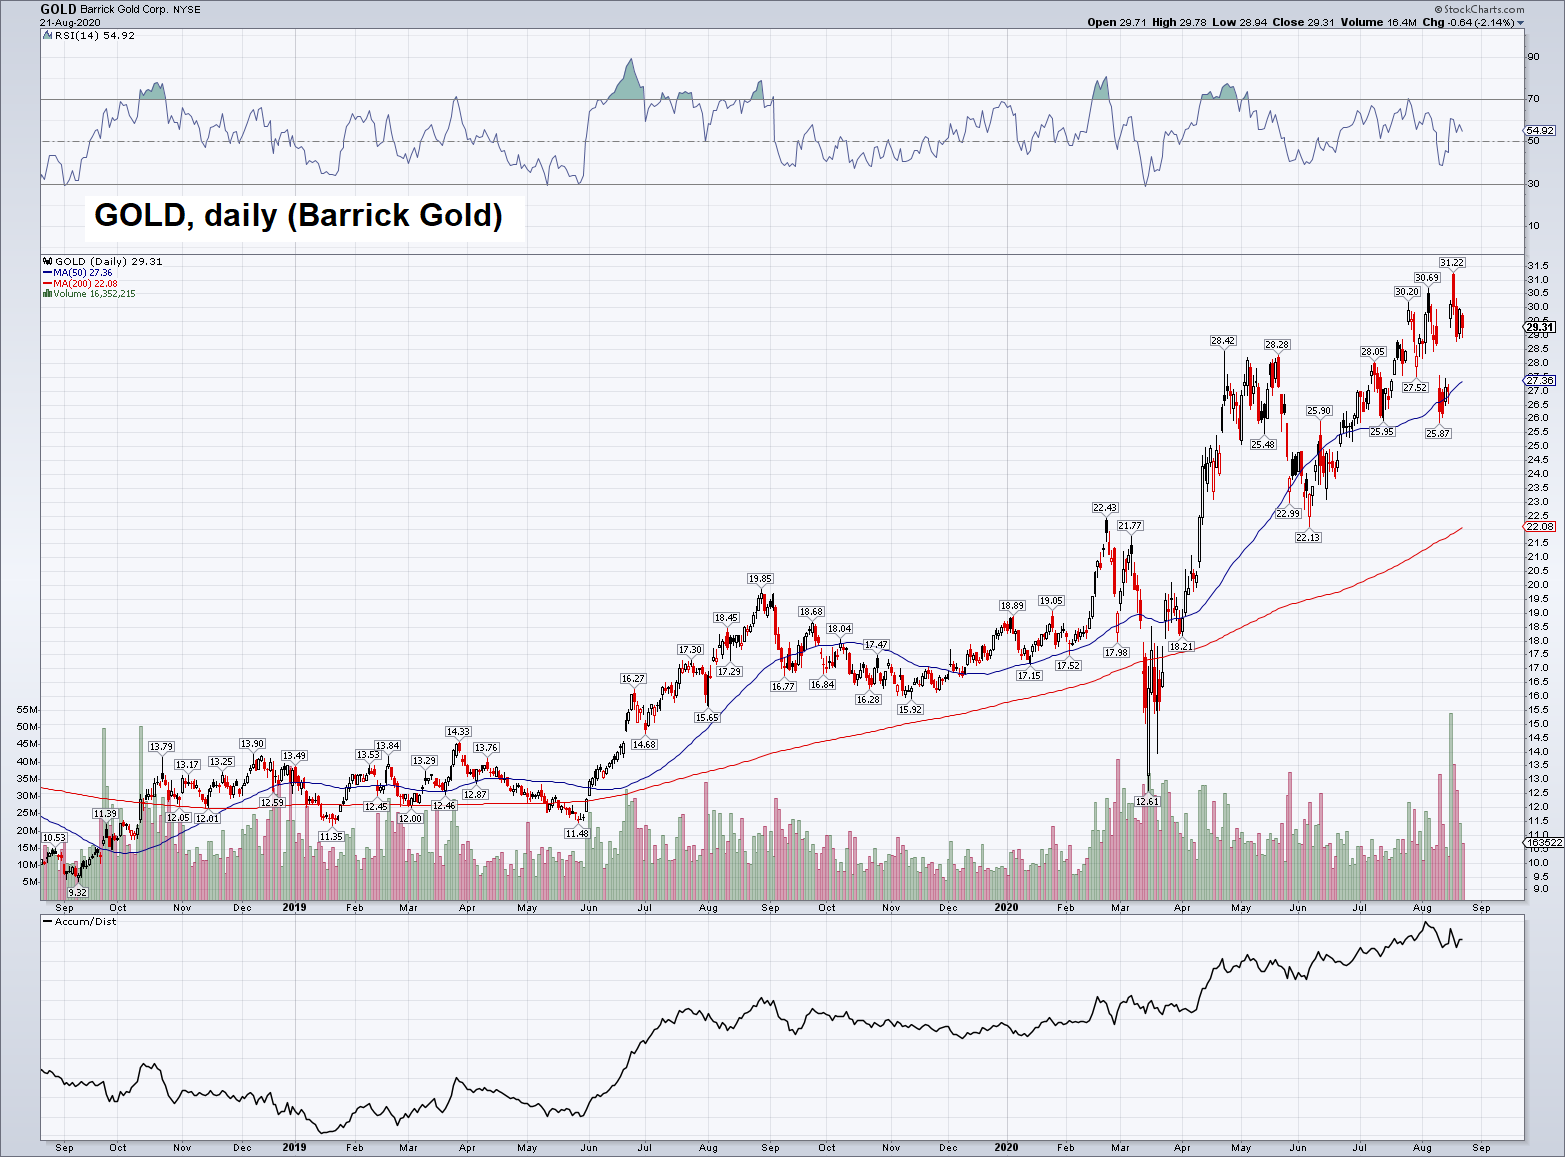 Barrick Gold Cop Daily, Sep 2019 - Aug 2020